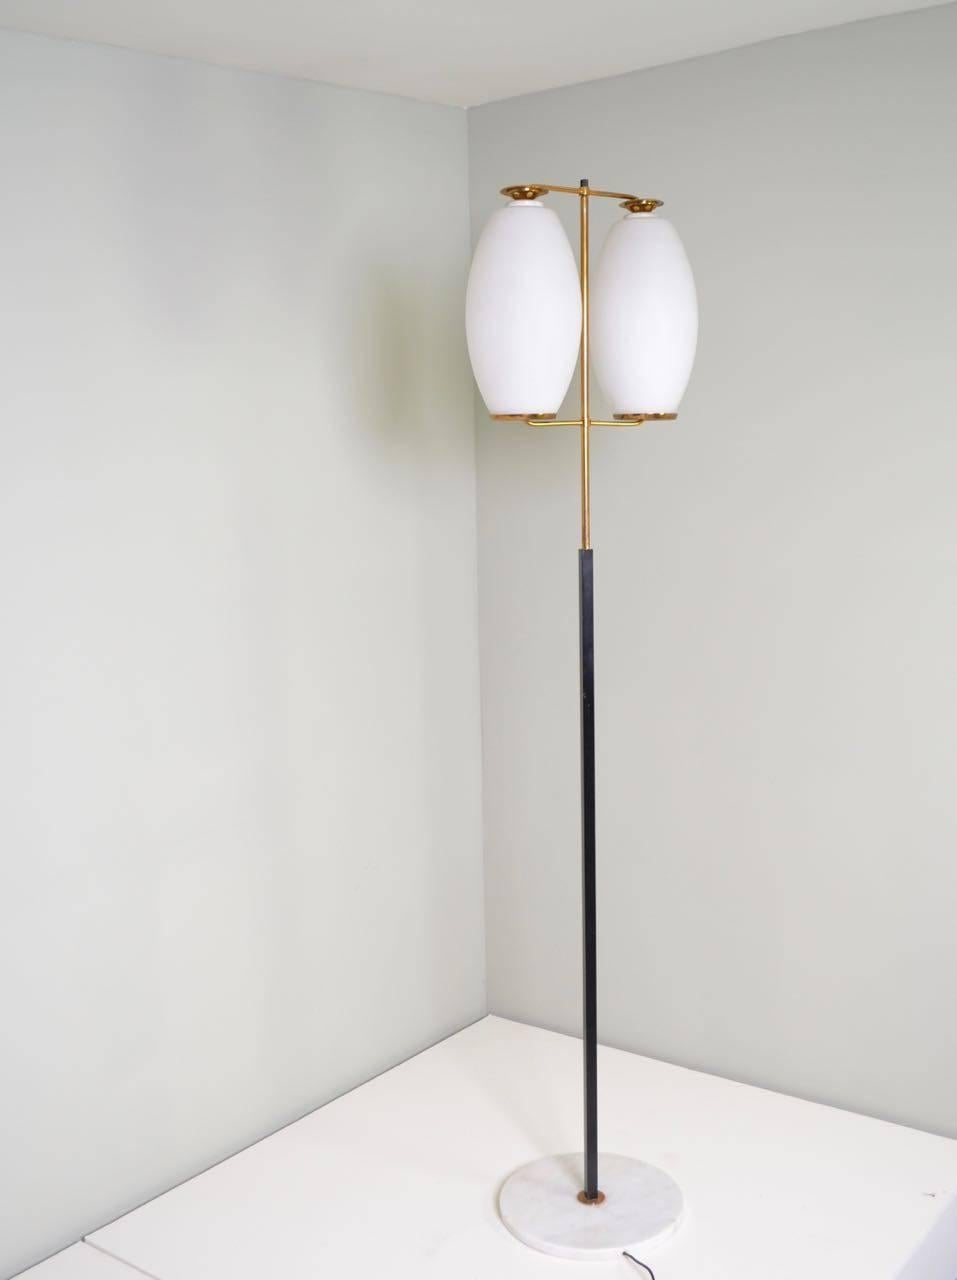 Stilnovo floor lamp with original label, published in the 
Catalogo Stilnovo No.11.
Black painted steel, lacquered brass, opaline glass shades and
a white marble base.